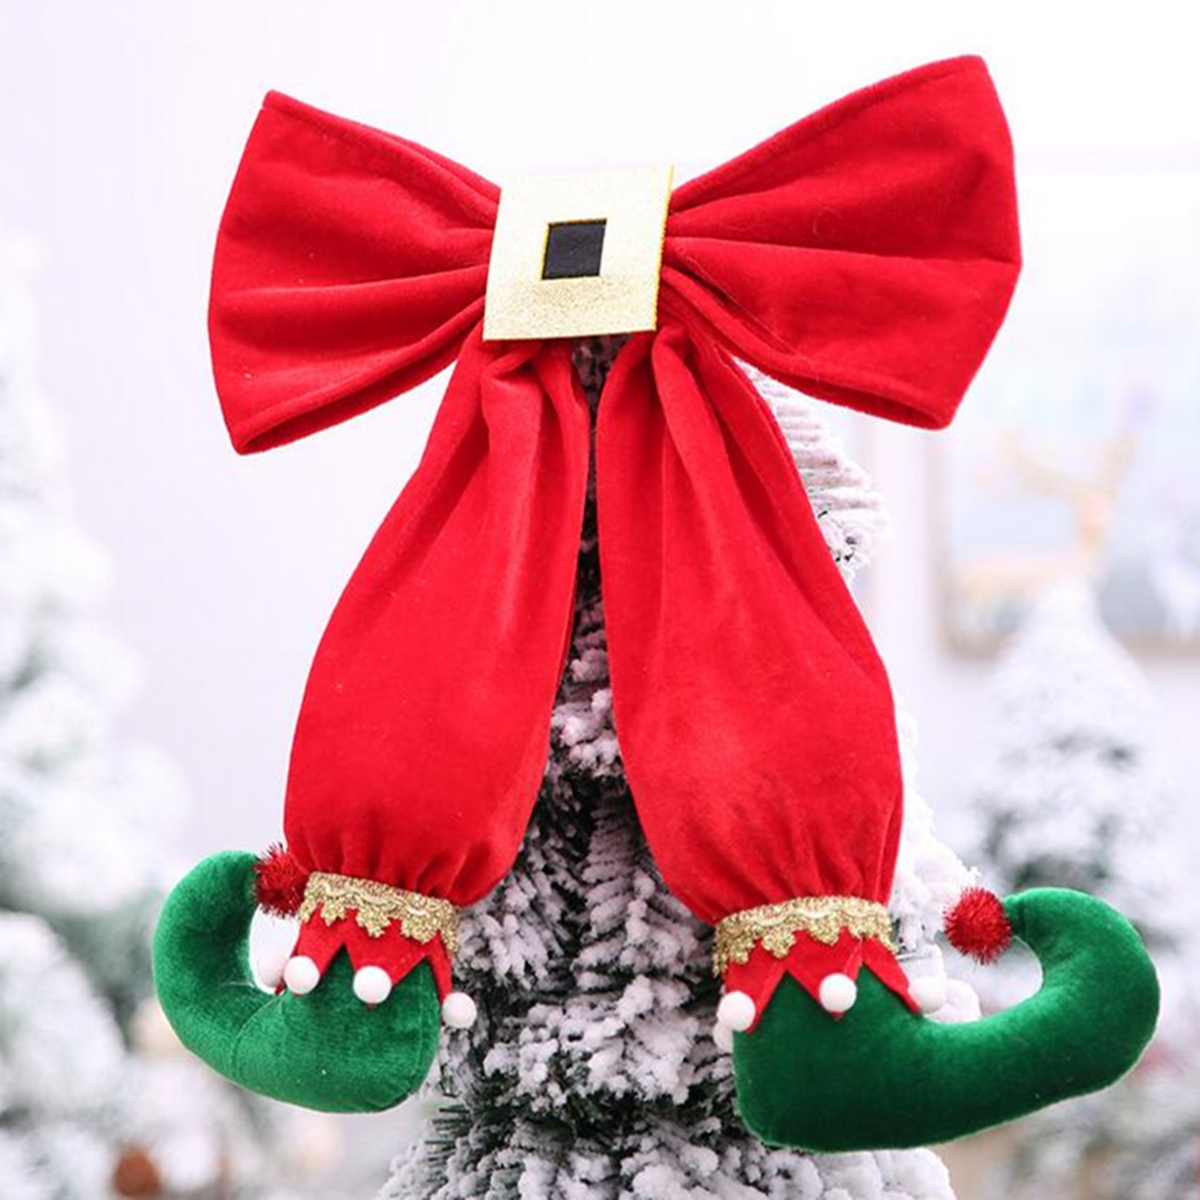 Christmas-Tree-Elf-Foot-Shape-Pendant-Party-Gifts-Home-Tree-Ornaments-Decorations-1360983-5